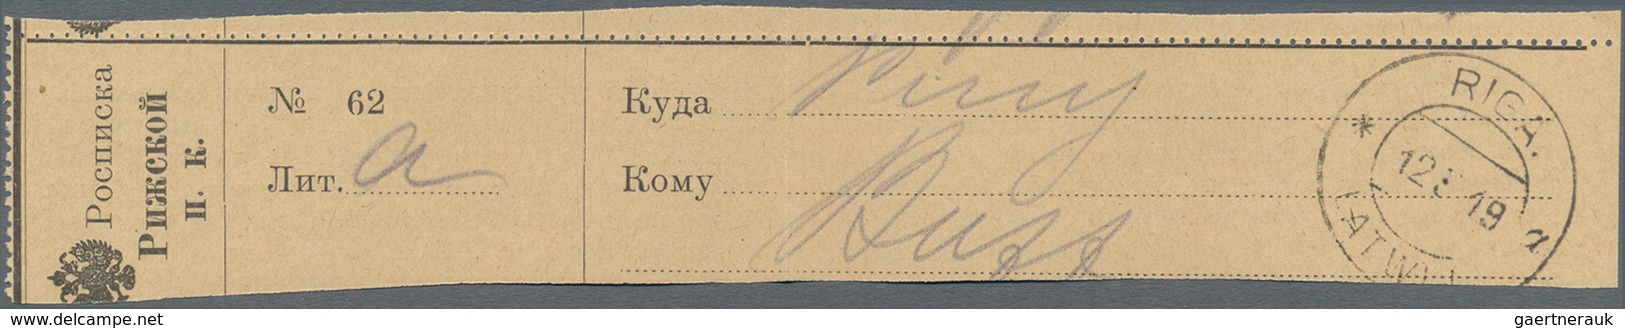 Lettland: 1919, Registered Card Letter Within " RIGA LATWIJA 12 5 19" With Delivery Receipt. - Latvia